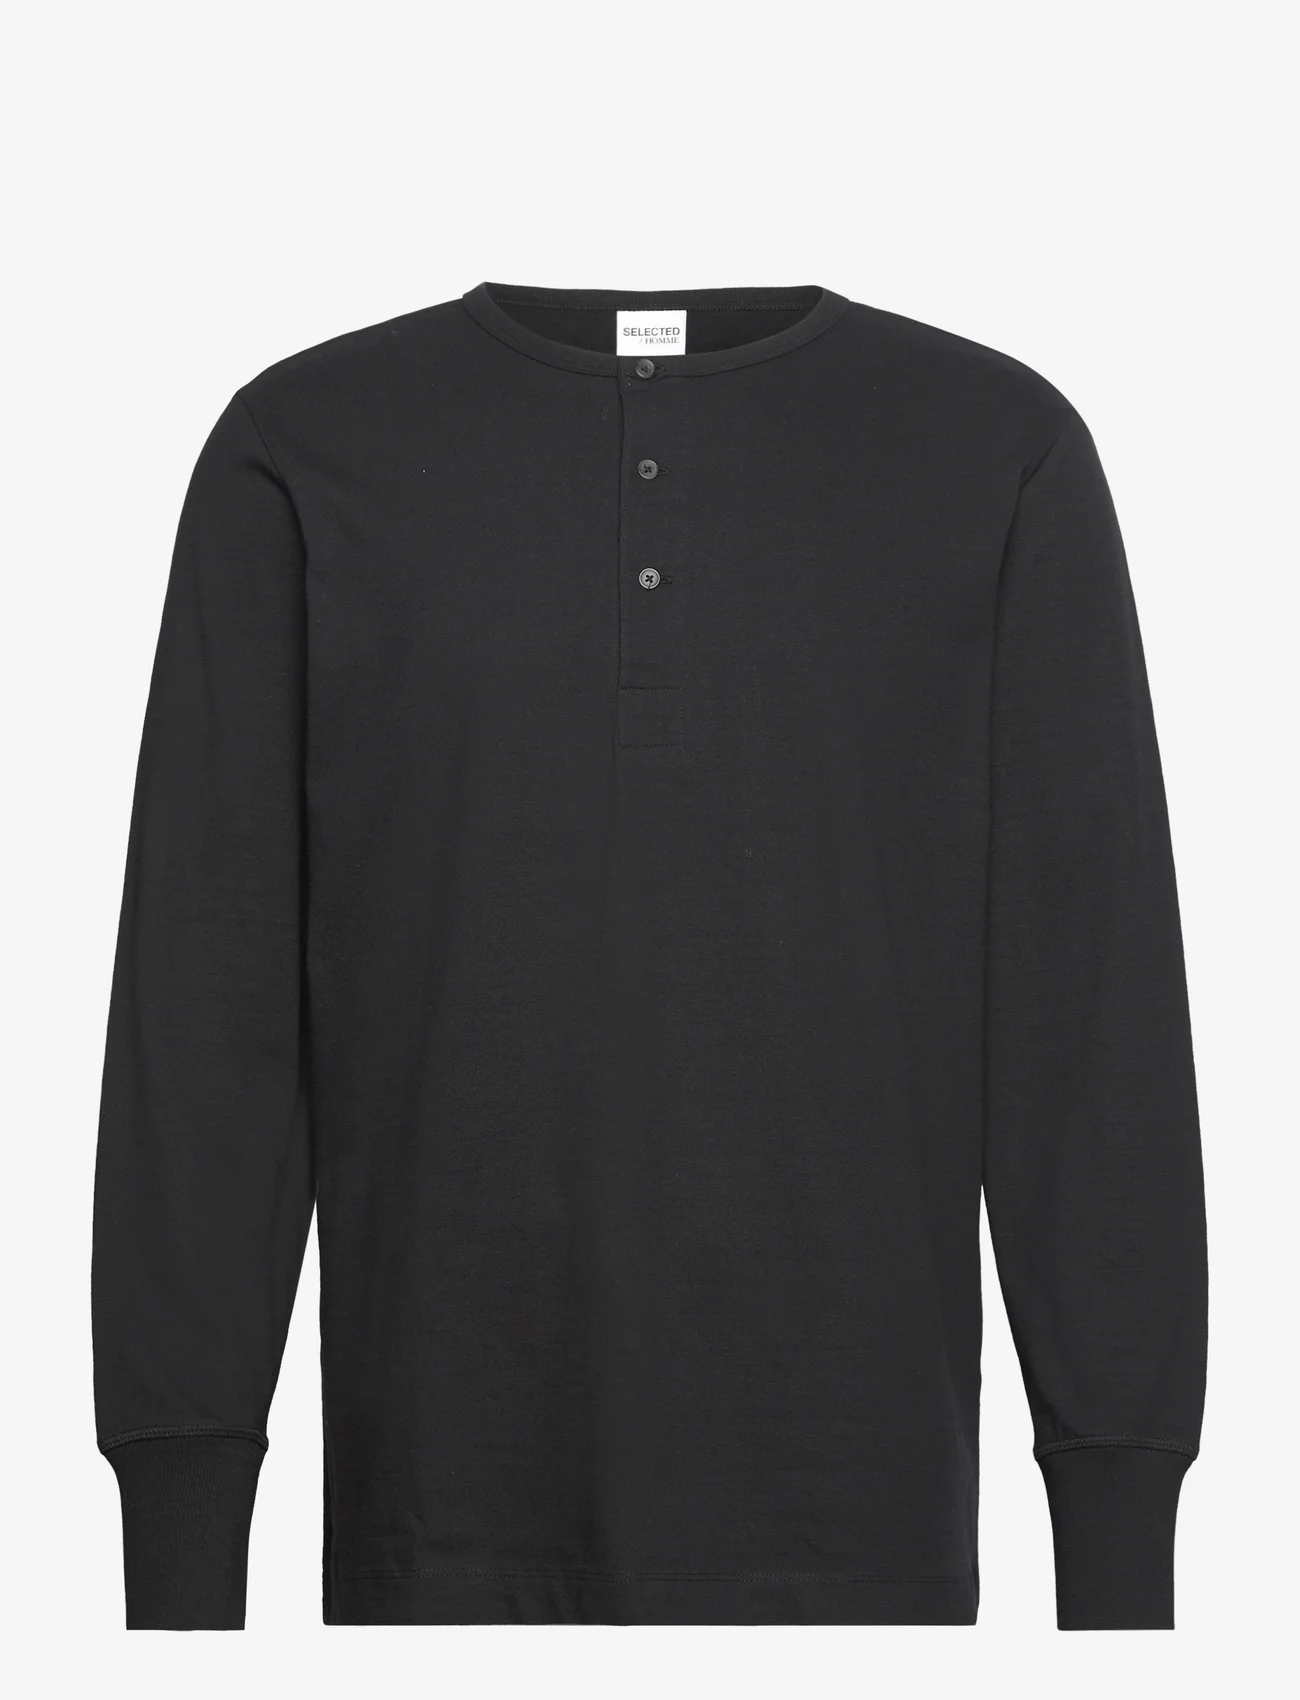 Selected Homme - SLHPHILLIP LS HENLEY NOOS - lowest prices - black - 0